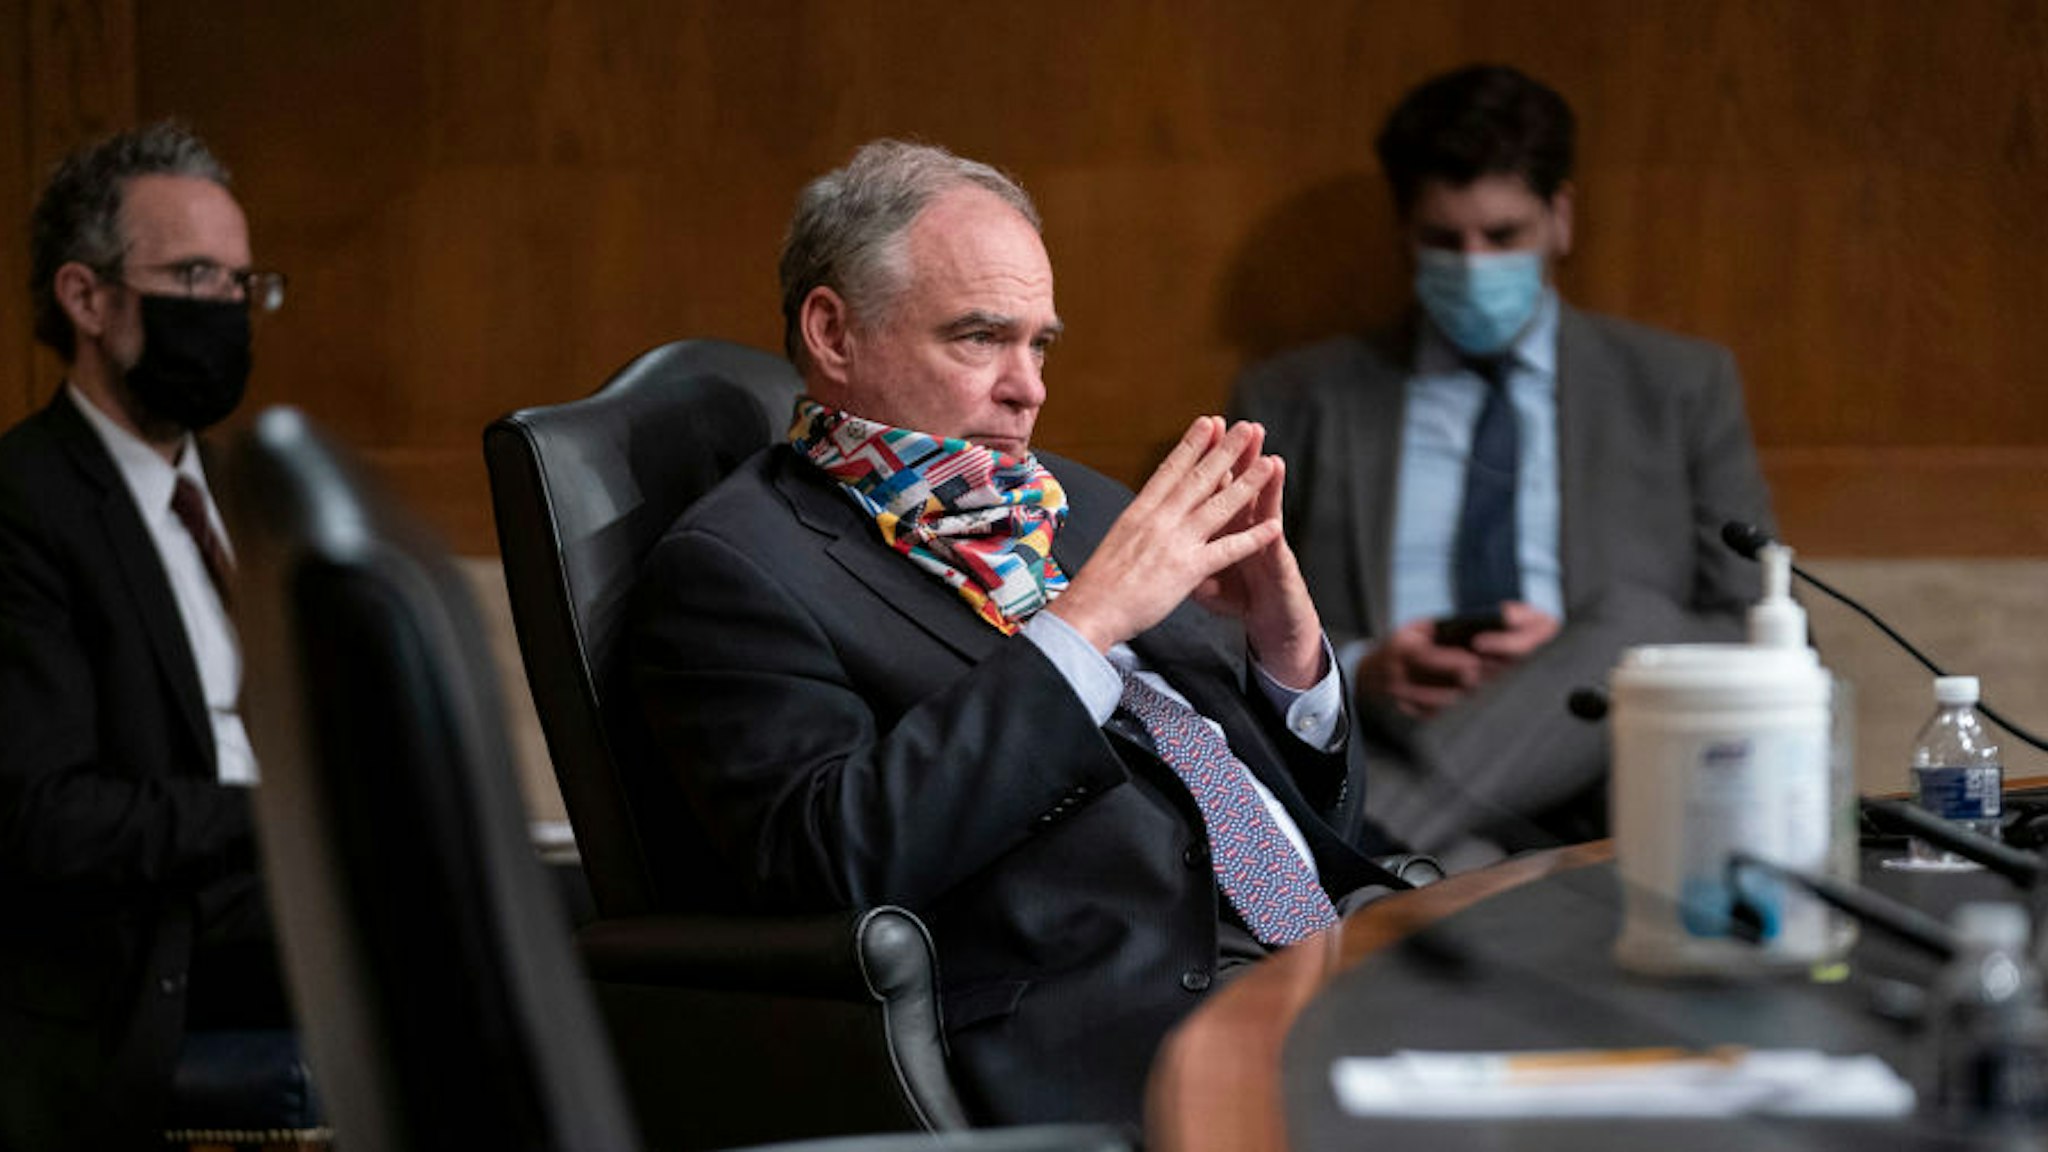 Sen. Tim Kaine (D-VA) listens during a Senate Health, Education, Labor, and Pensions hearing on a plan for students to safely return to college amid the COVID-19 pandemic on Capitol Hill on June 4, 2020 in Washington, DC.Top university officials testified about how to return students to college campuses safely in the fall after the coronavirus outbreak sent most students home early in the spring. (Photo by Sarah Silbiger/Getty Images)